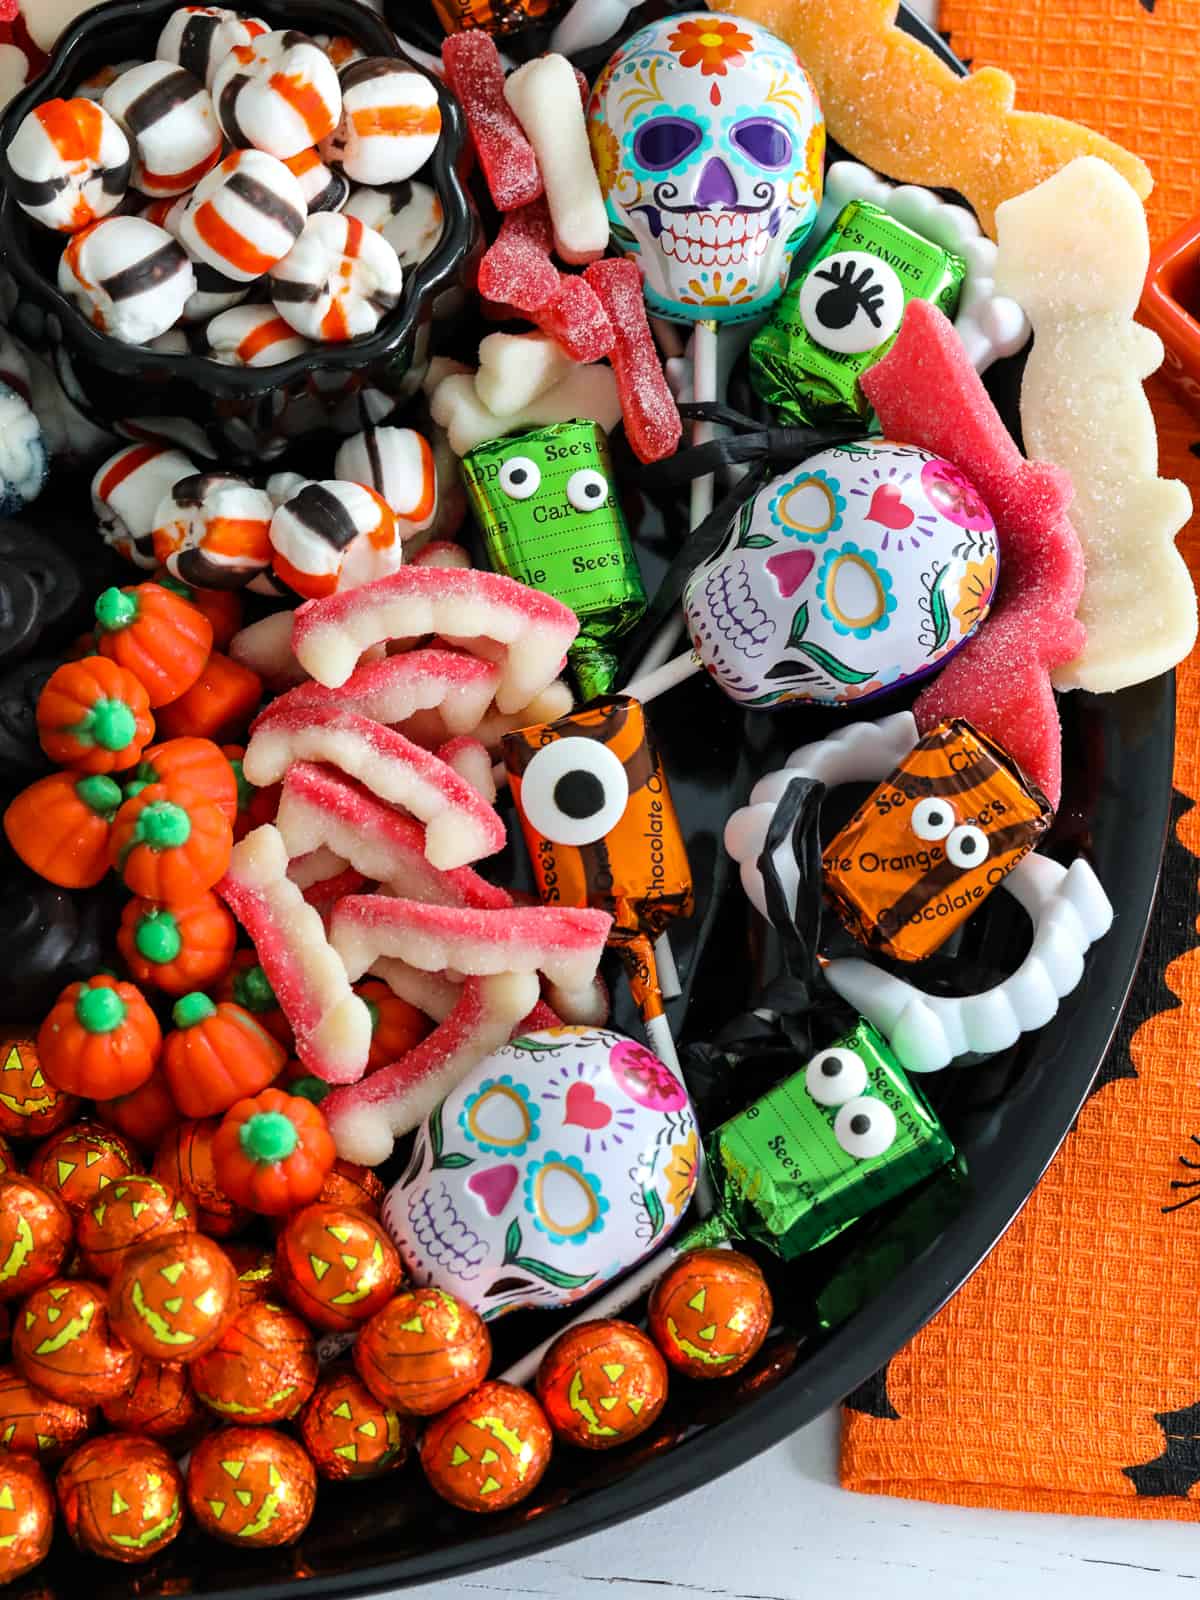 https://www.delicioustable.com/wp-content/uploads/2022/10/Halloween-candy-board-filled-with-sweet-treats.jpg